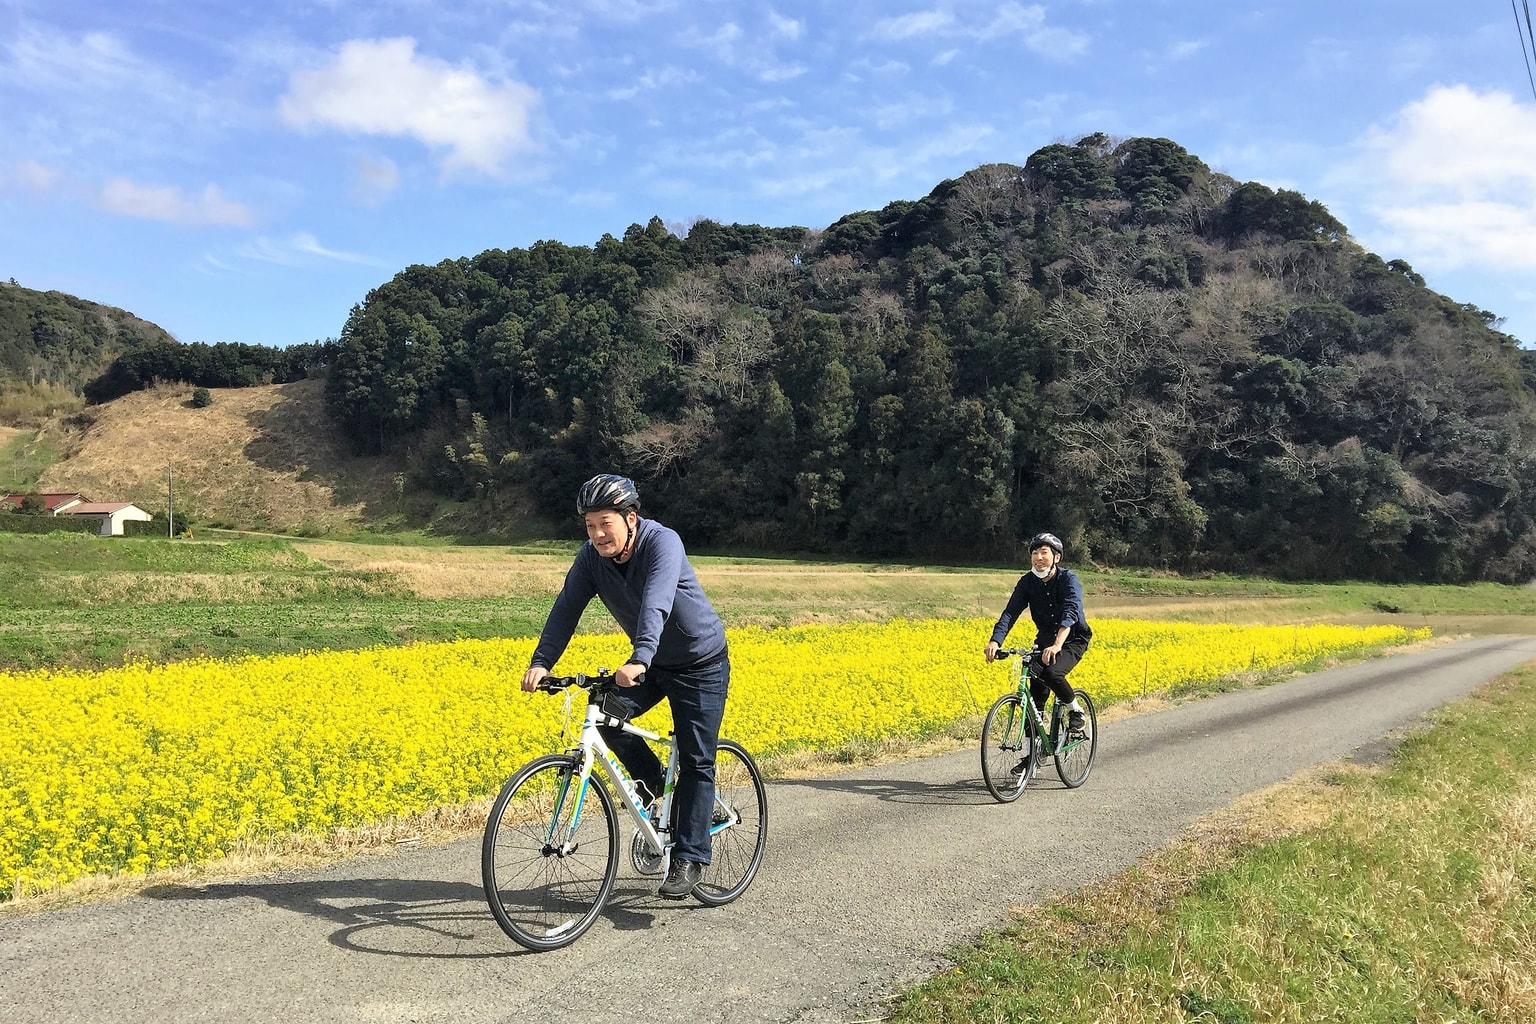 Us, Bikes And Nothing but Nature: Cycling in the Wild in Chiba’s Minamiboso